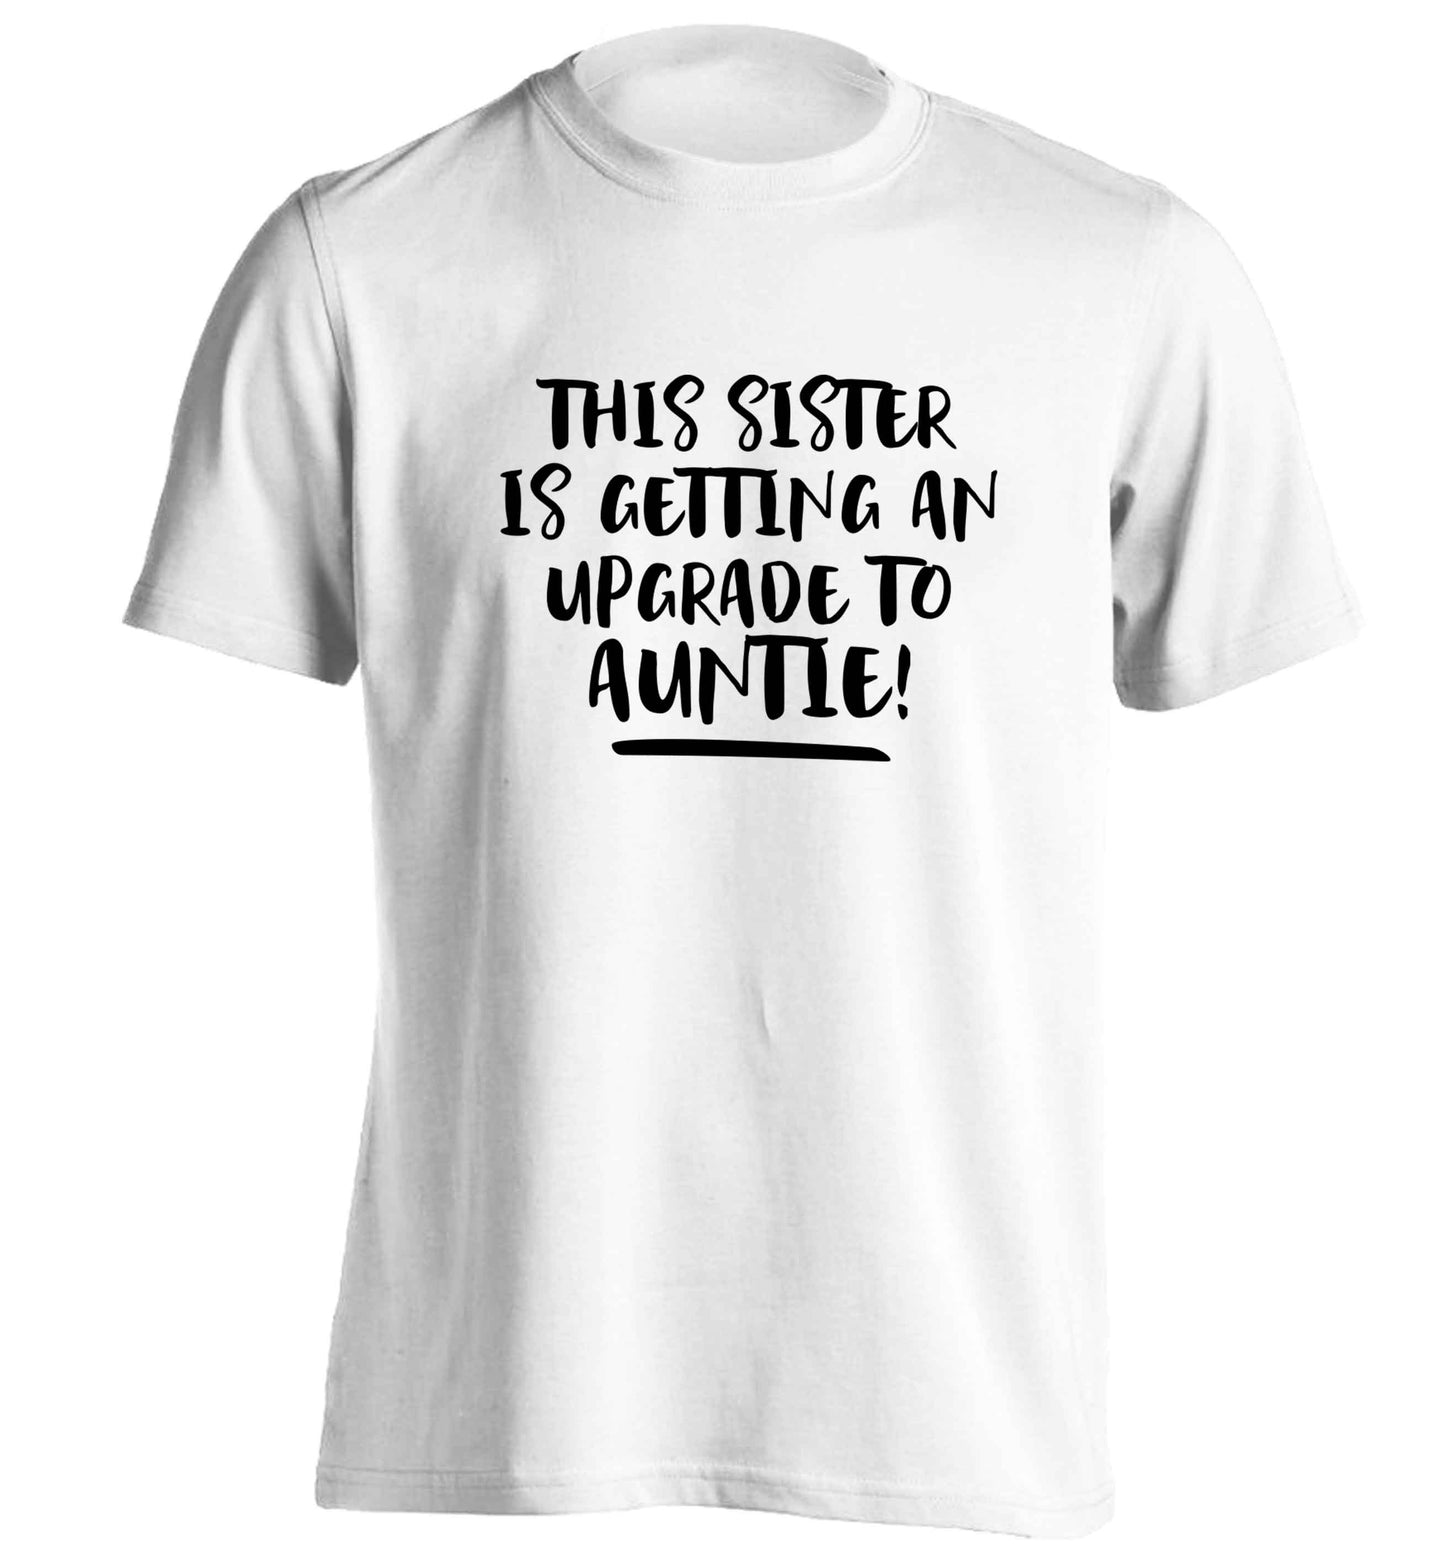 This sister is getting an upgrade to auntie! adults unisex white Tshirt 2XL